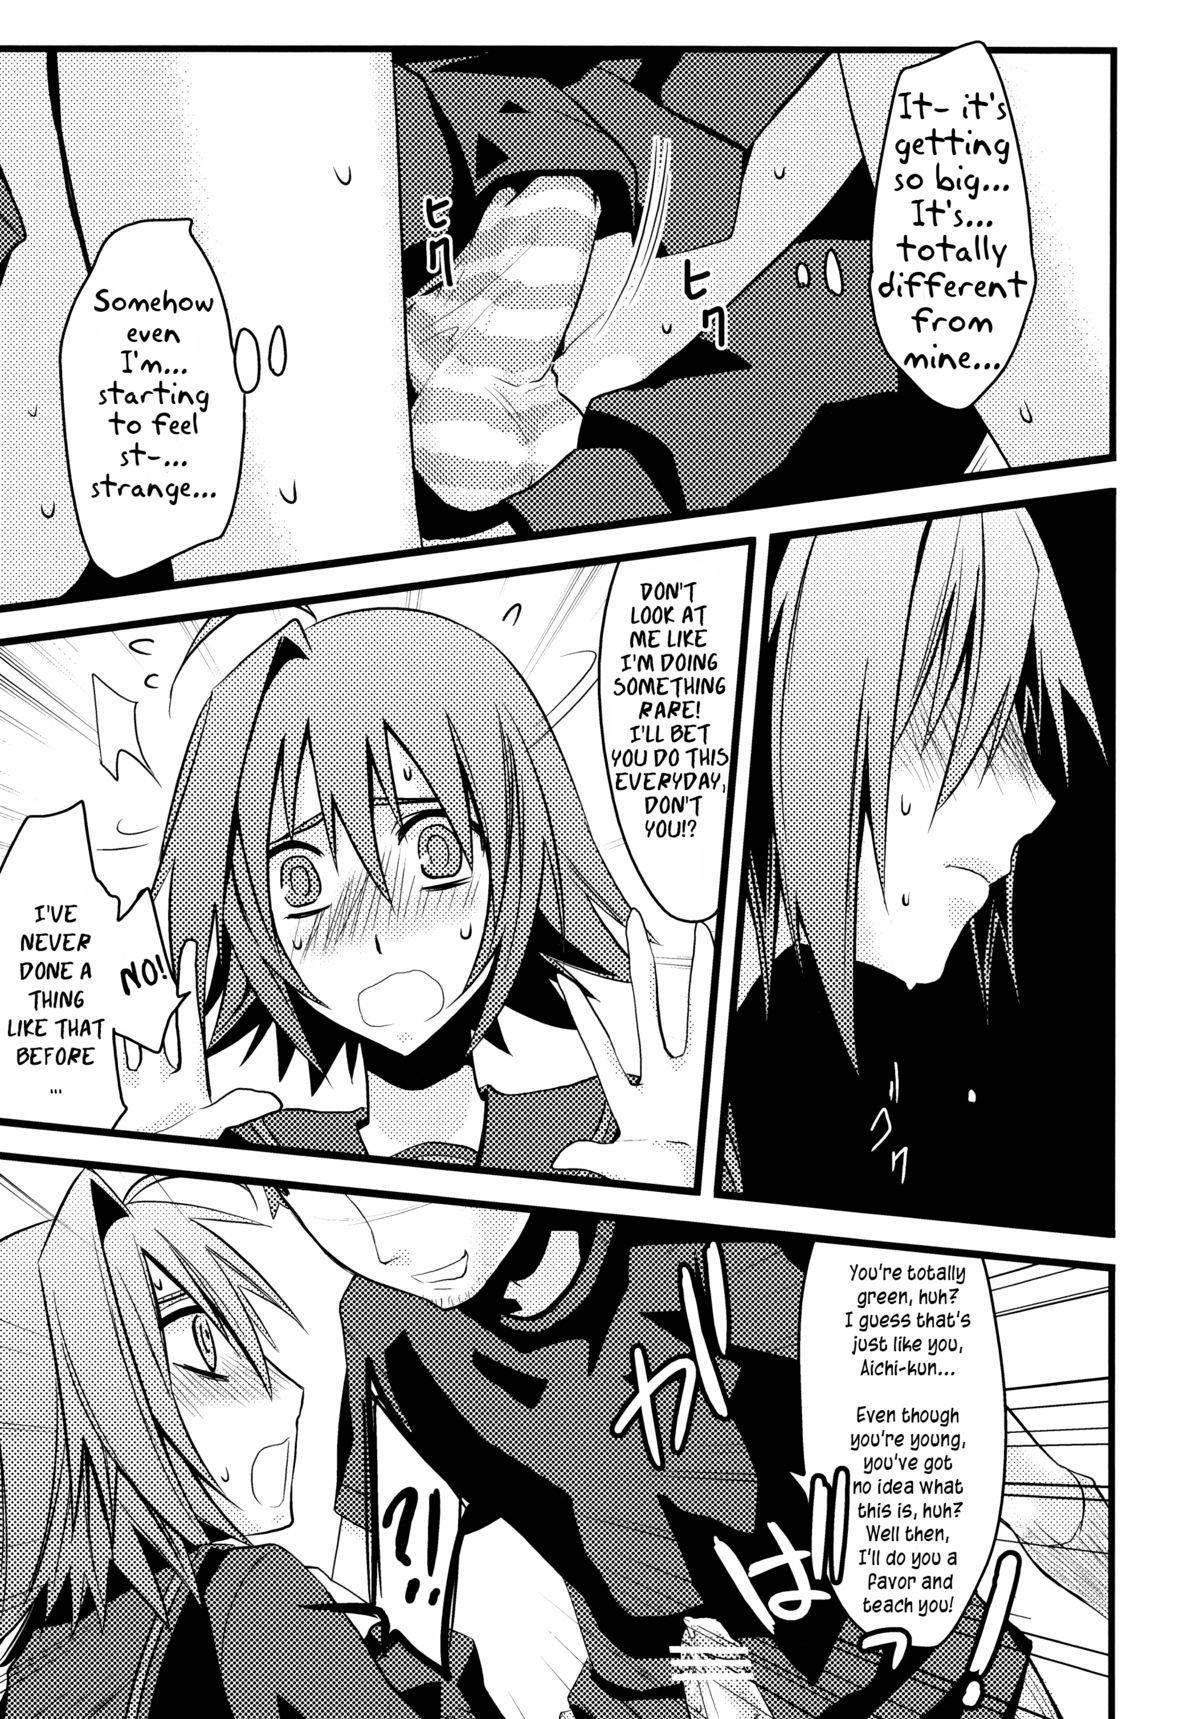 Gay Broken Image Crush - Cardfight vanguard Picked Up - Page 10